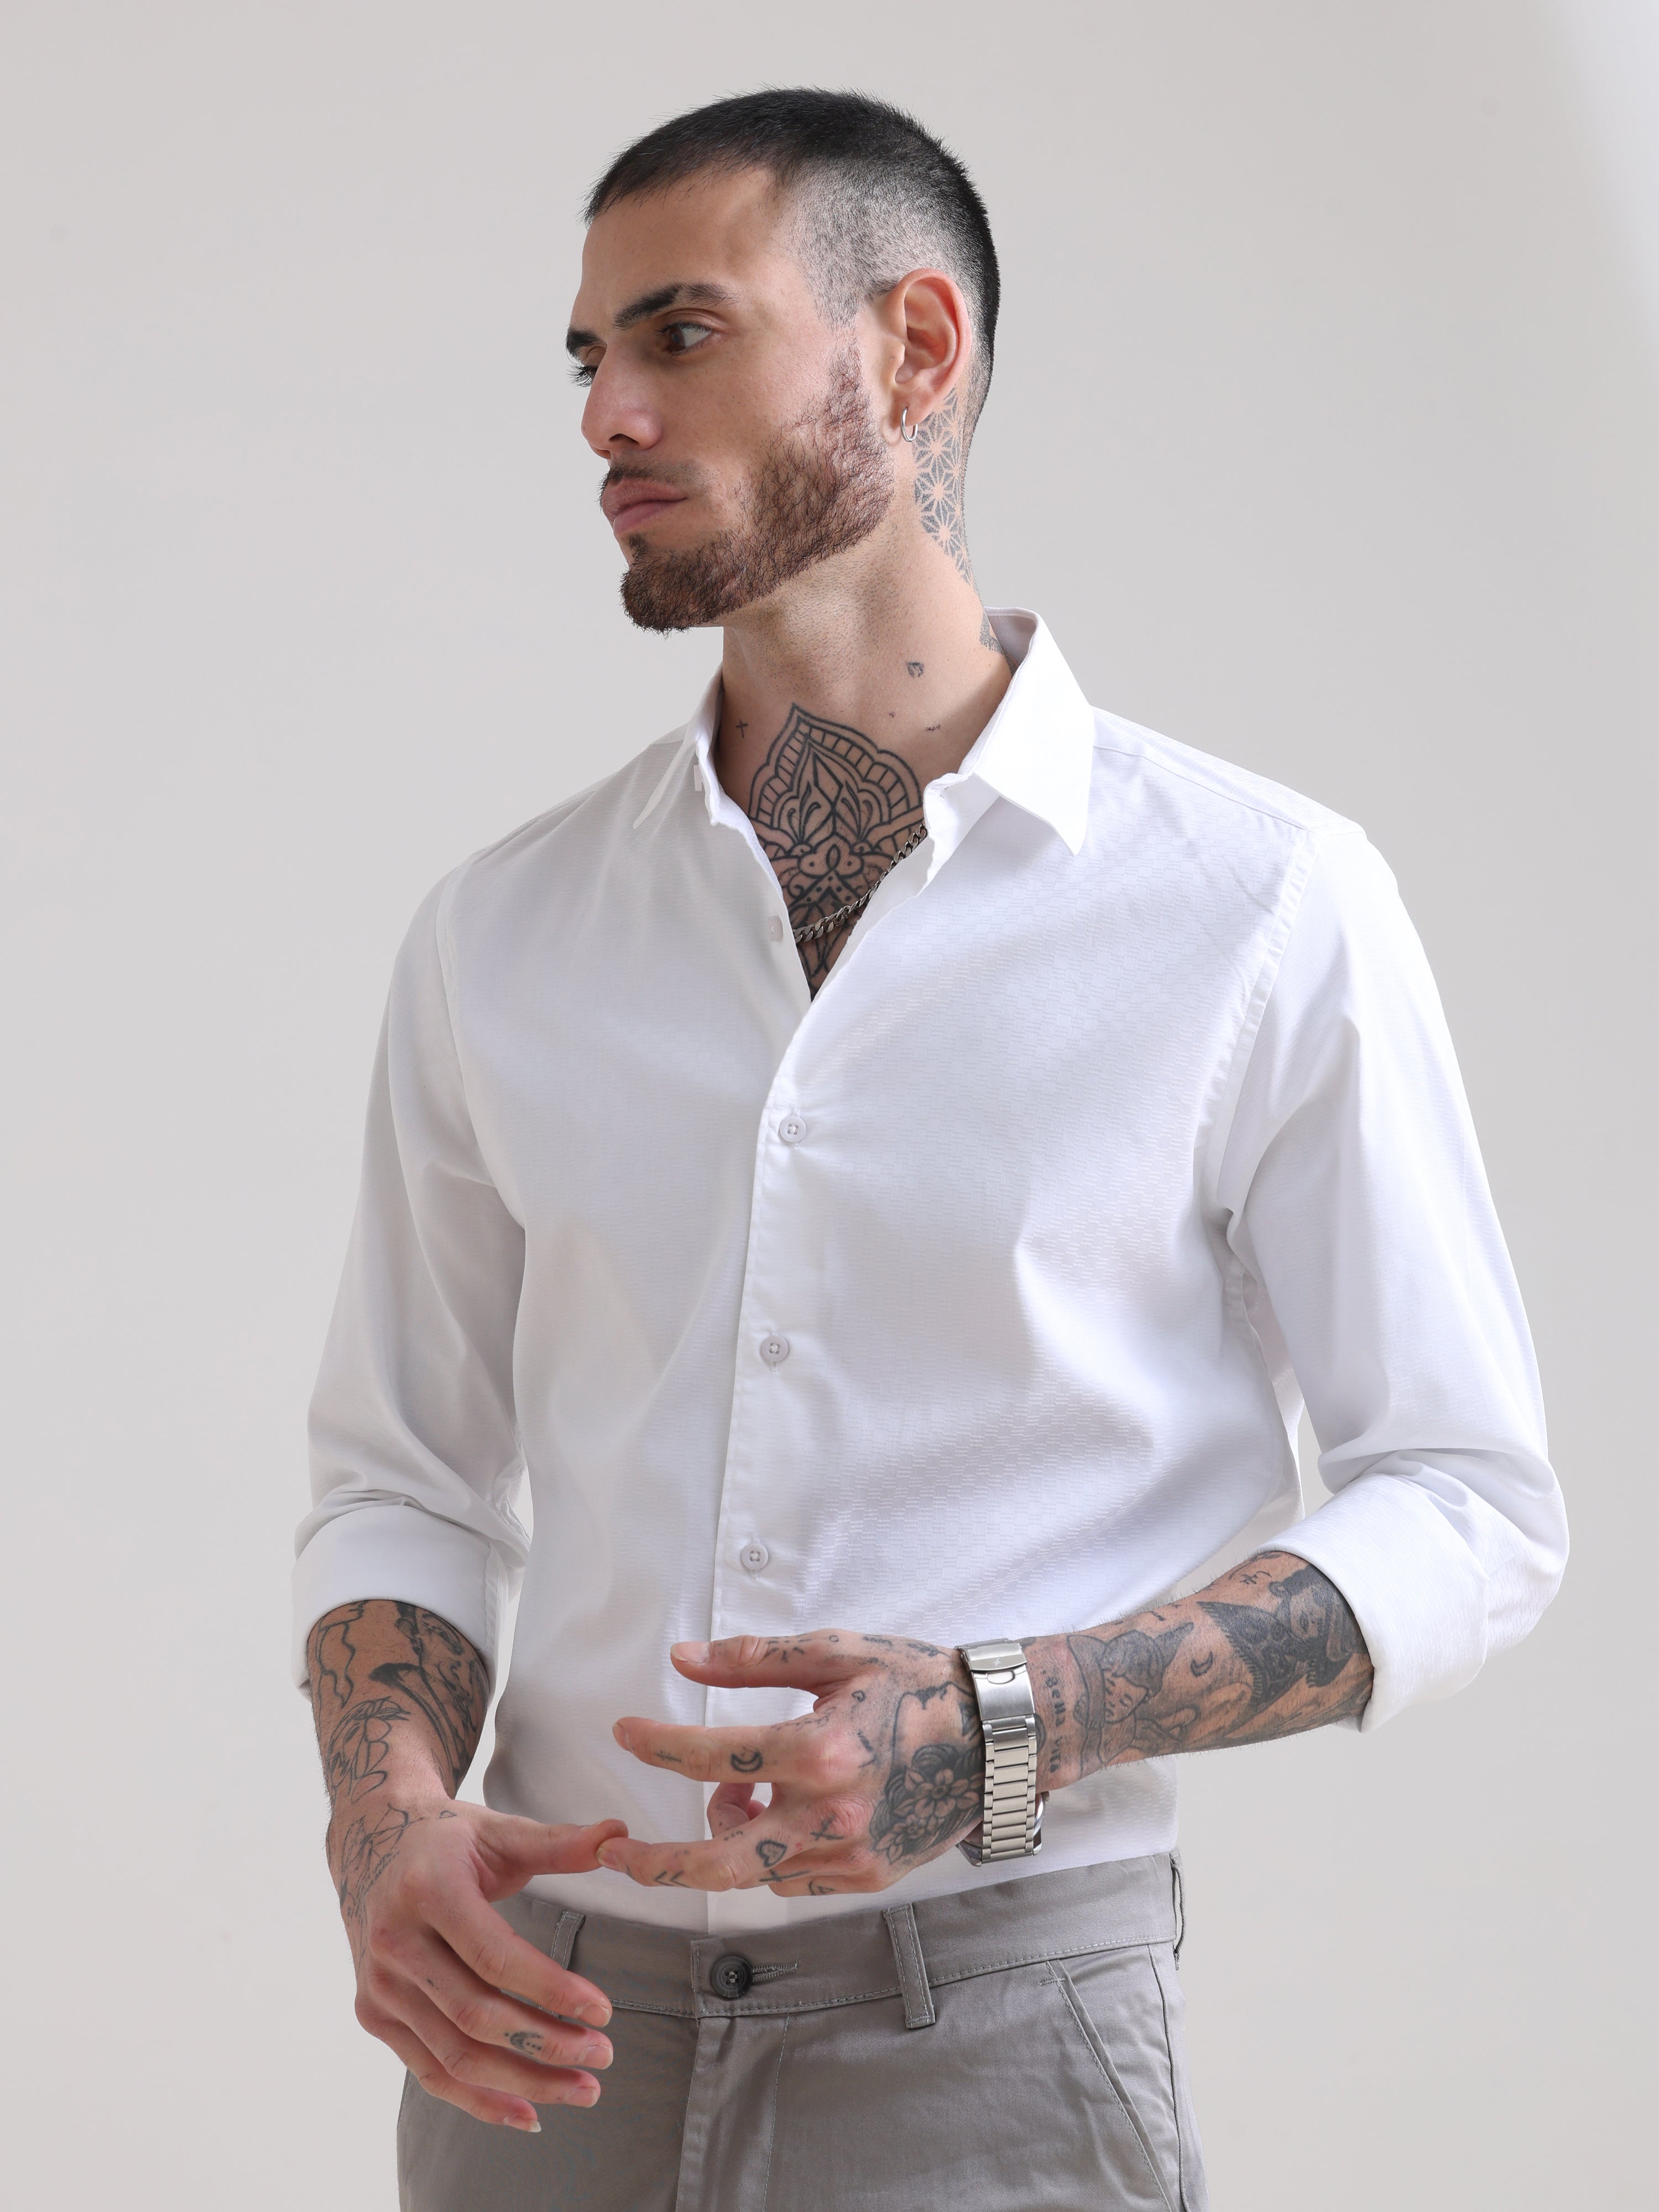 Frost White Textured Solid ShirtRs. 1399.00